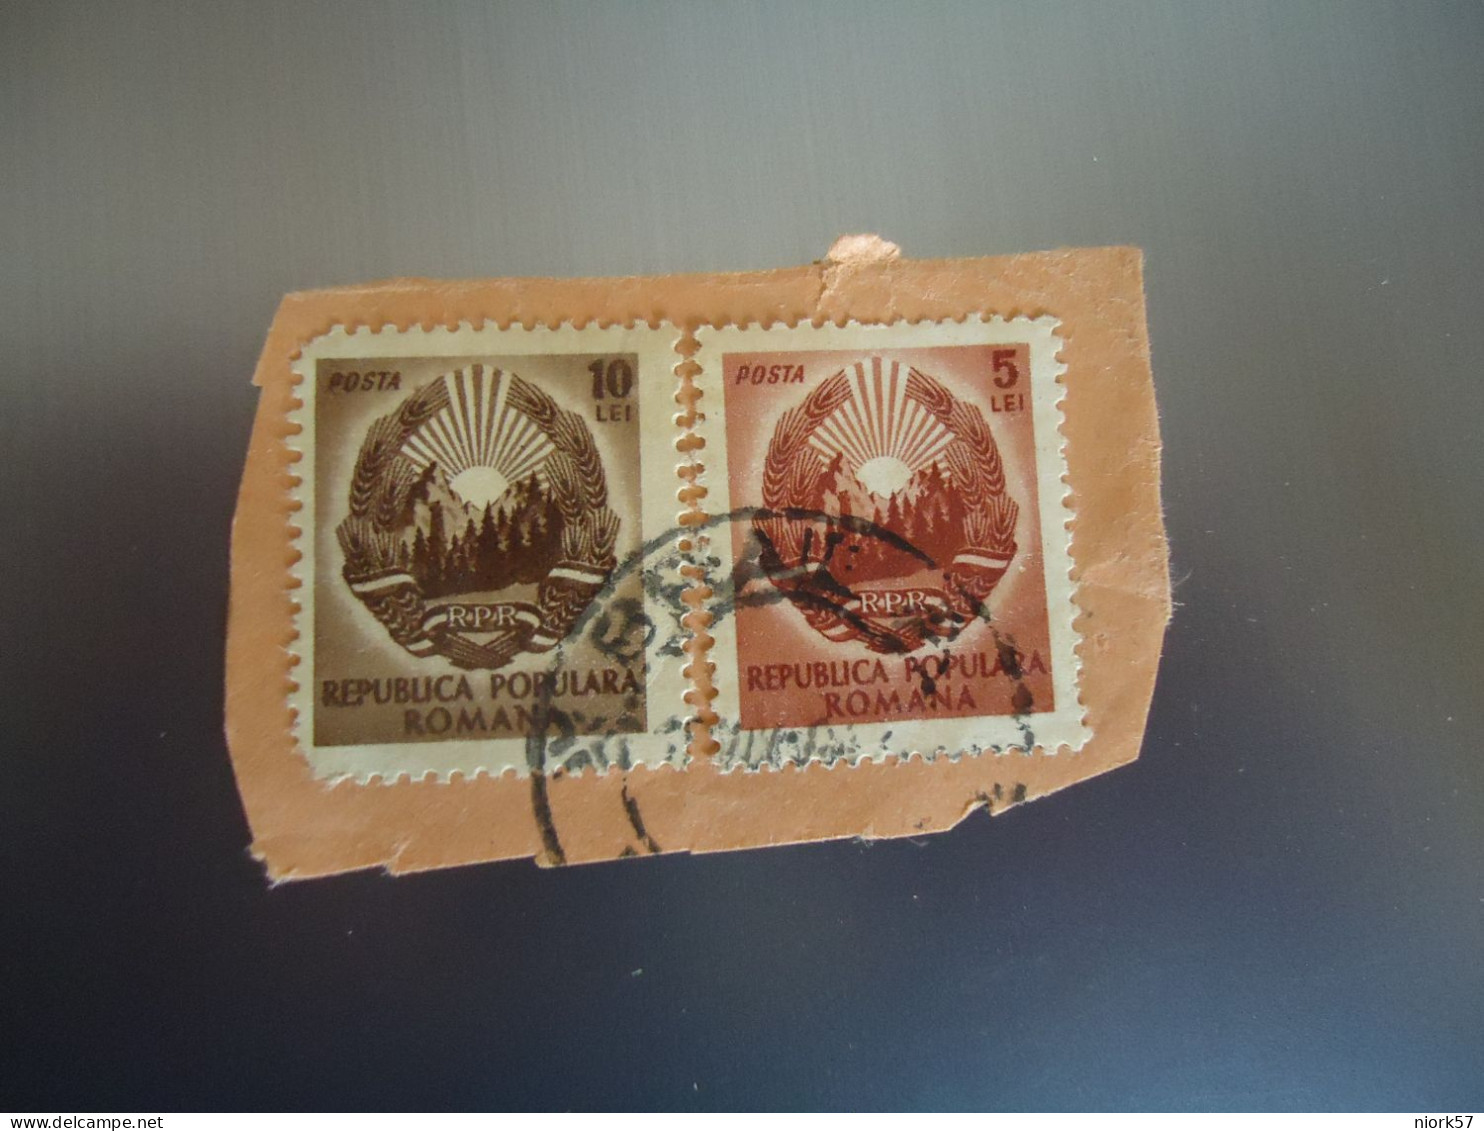 ROMANIA  USED STAMPS 2  ON PAPER  STAMPS 2 OLD  WITH POSTMARK - Postmark Collection